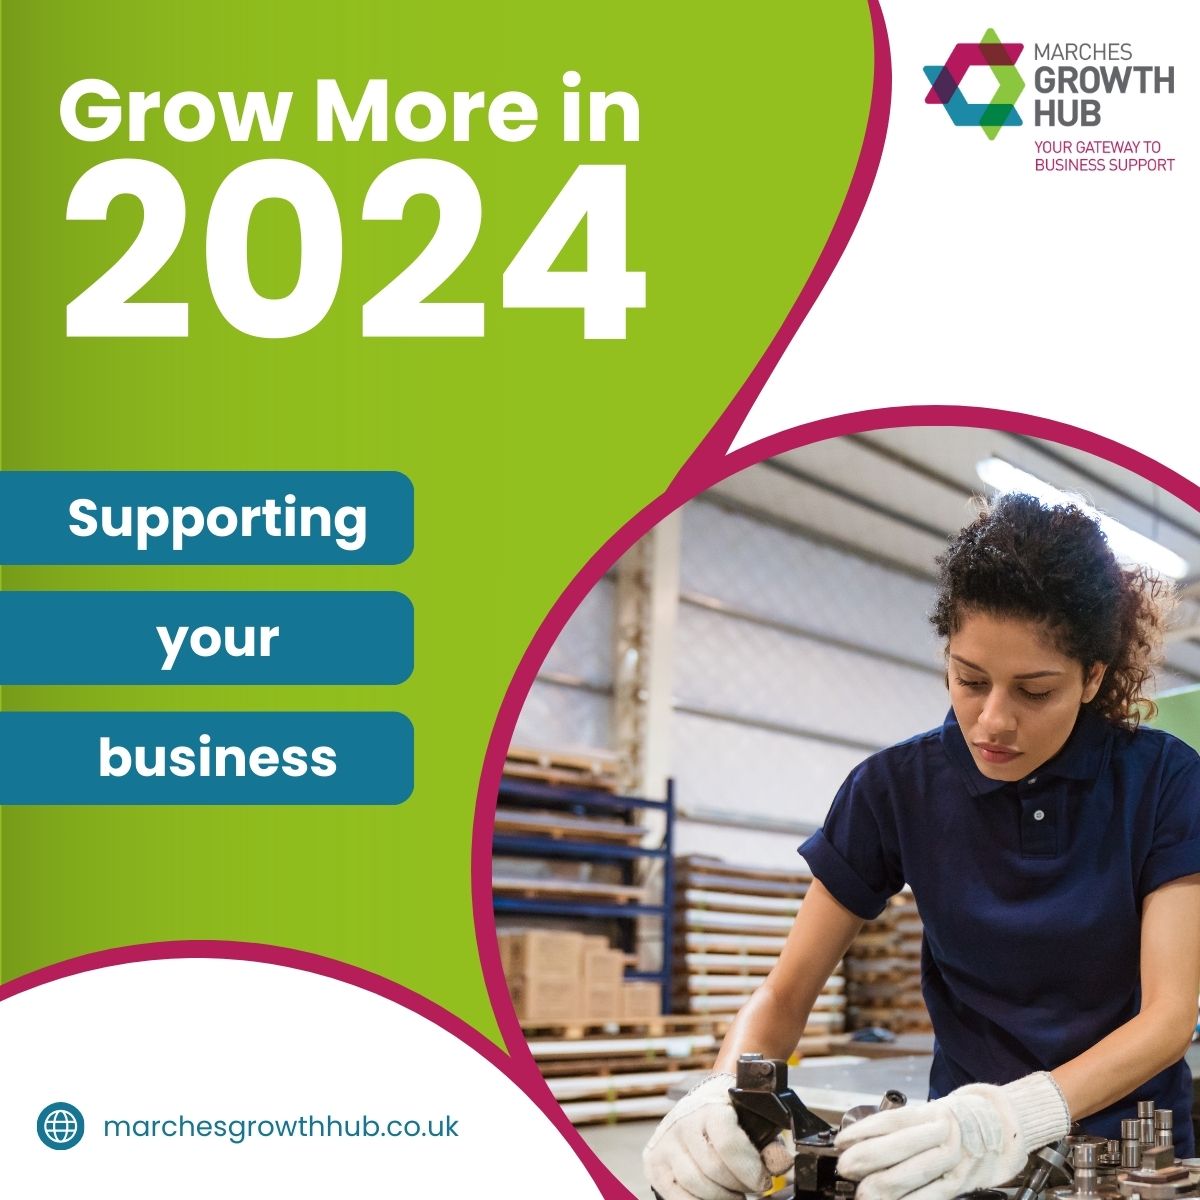 Did you know? The Marches Growth Hub is your gateway to business support. Explore our website for a variety of funding, events, seminars and expert advice. Let's make 2024 the year your business thrives. bit.ly/49ovp6e #GrowMoreIn2024